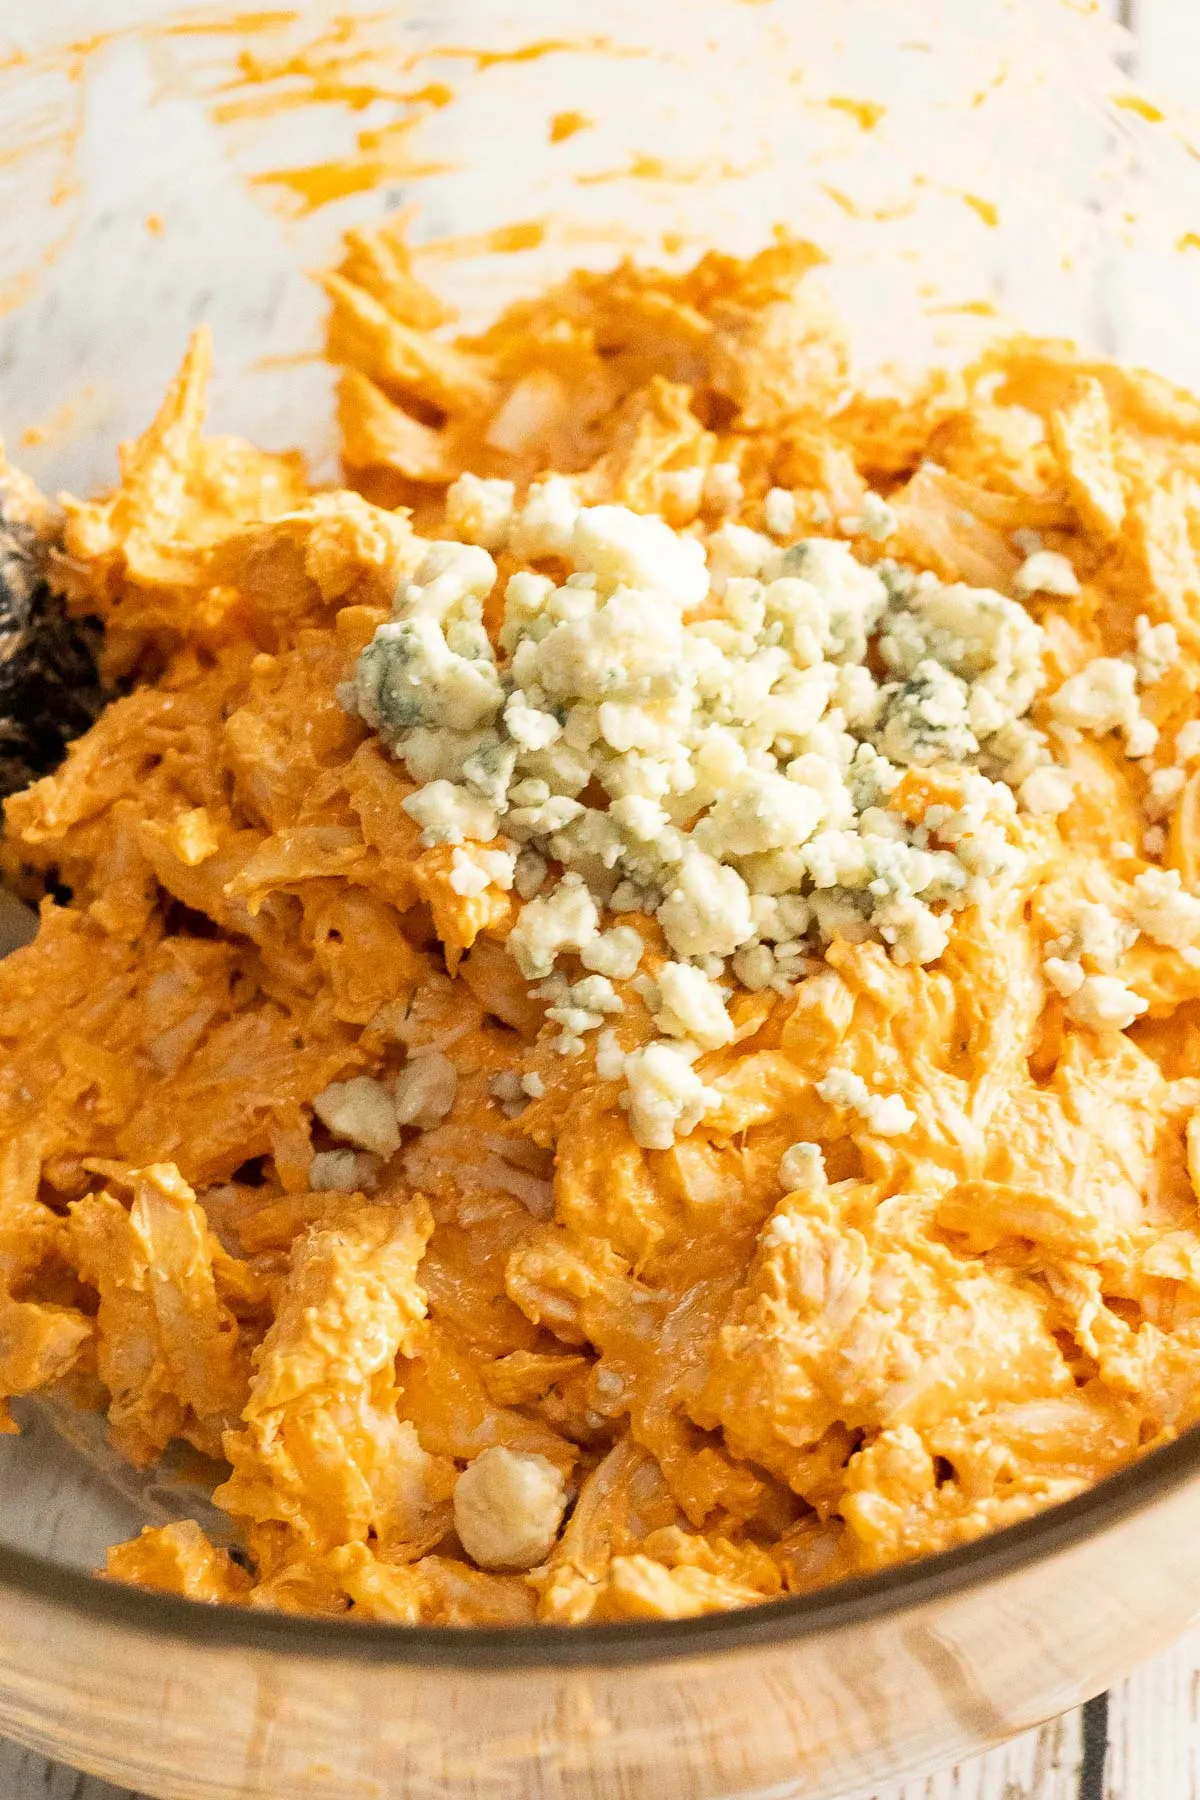 adding blue cheese and shredded chicken to the buffalo sauce mixture